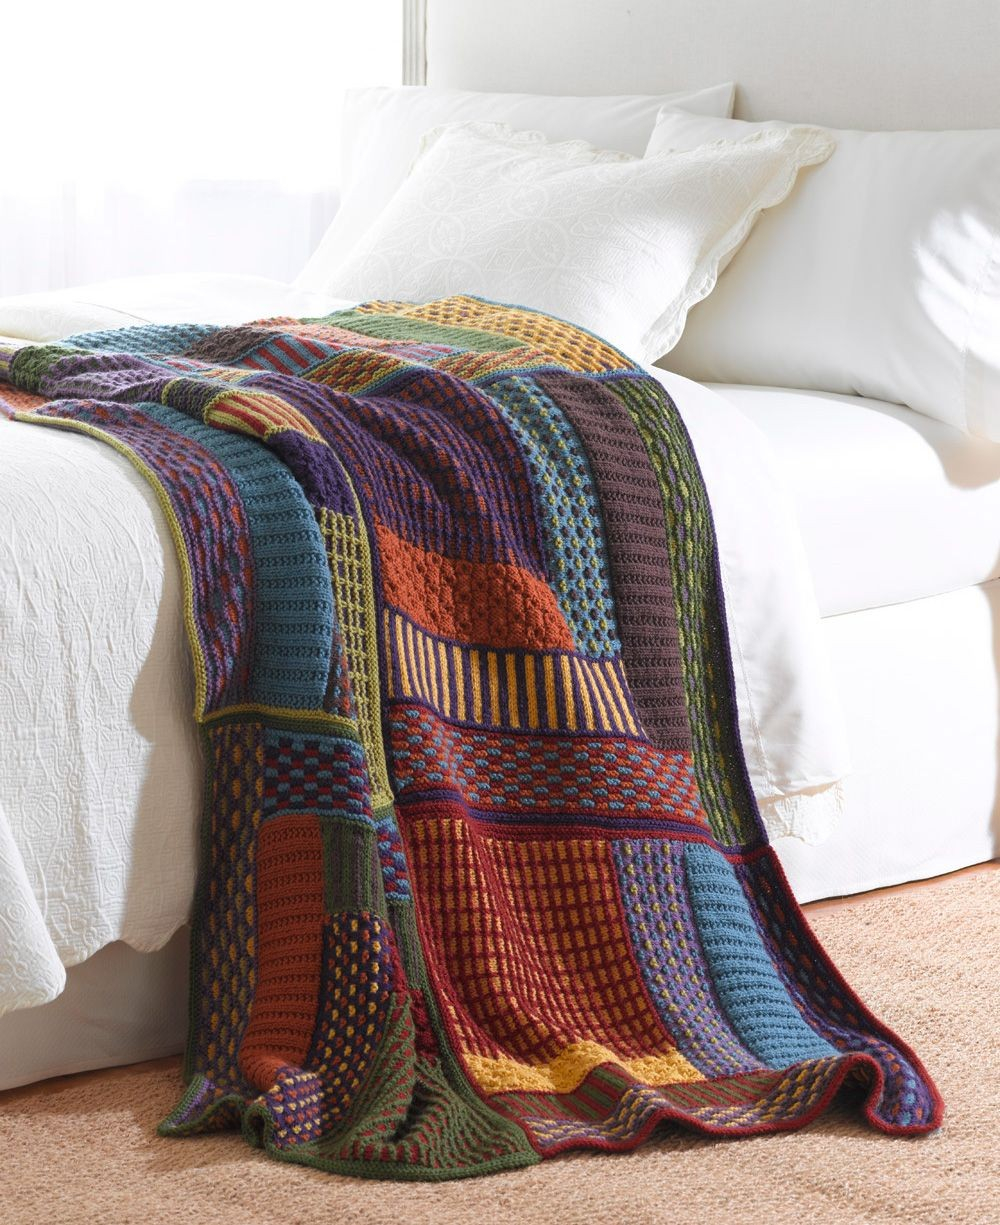 Knitting Patterns Afghans Knitted Throw Rugs Patterns Lovely Free Knitting Pattern For Slip